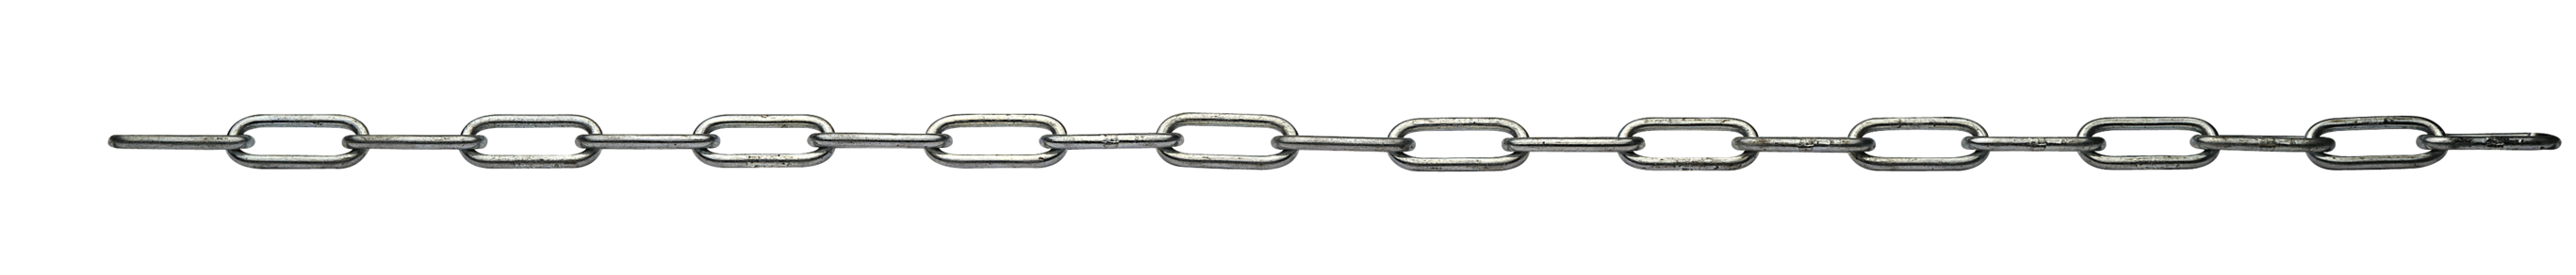 Chain PNG - 2188